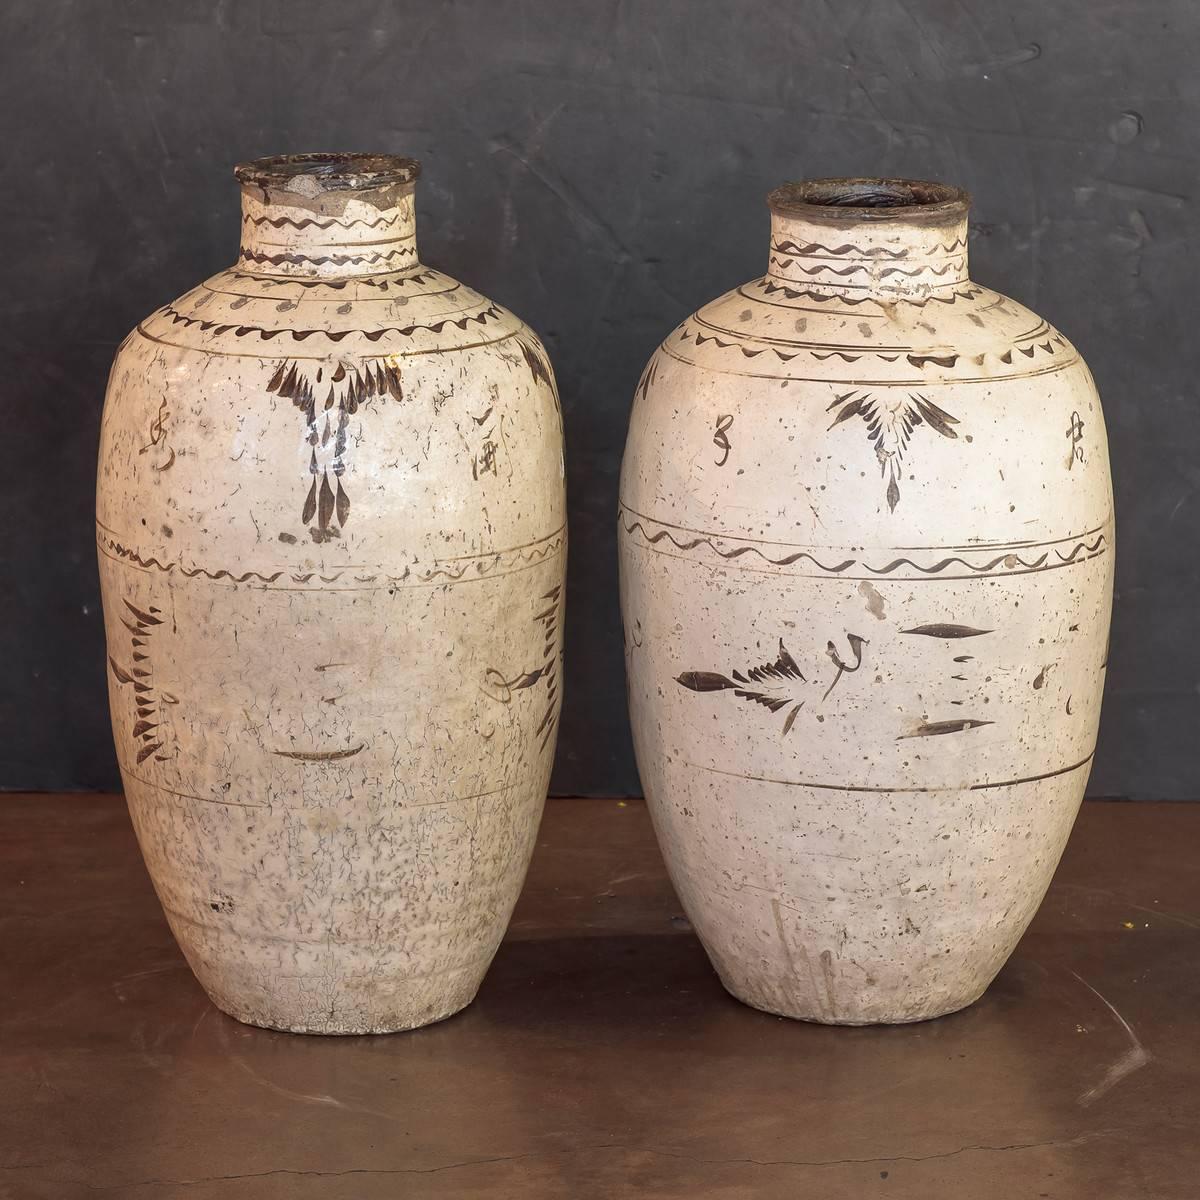 A large size Cizhou jars from China. Dated to Yuan-Ming dynasty period. The avoid body in white slip with dark brown paintings. Approximate: Height 28.5